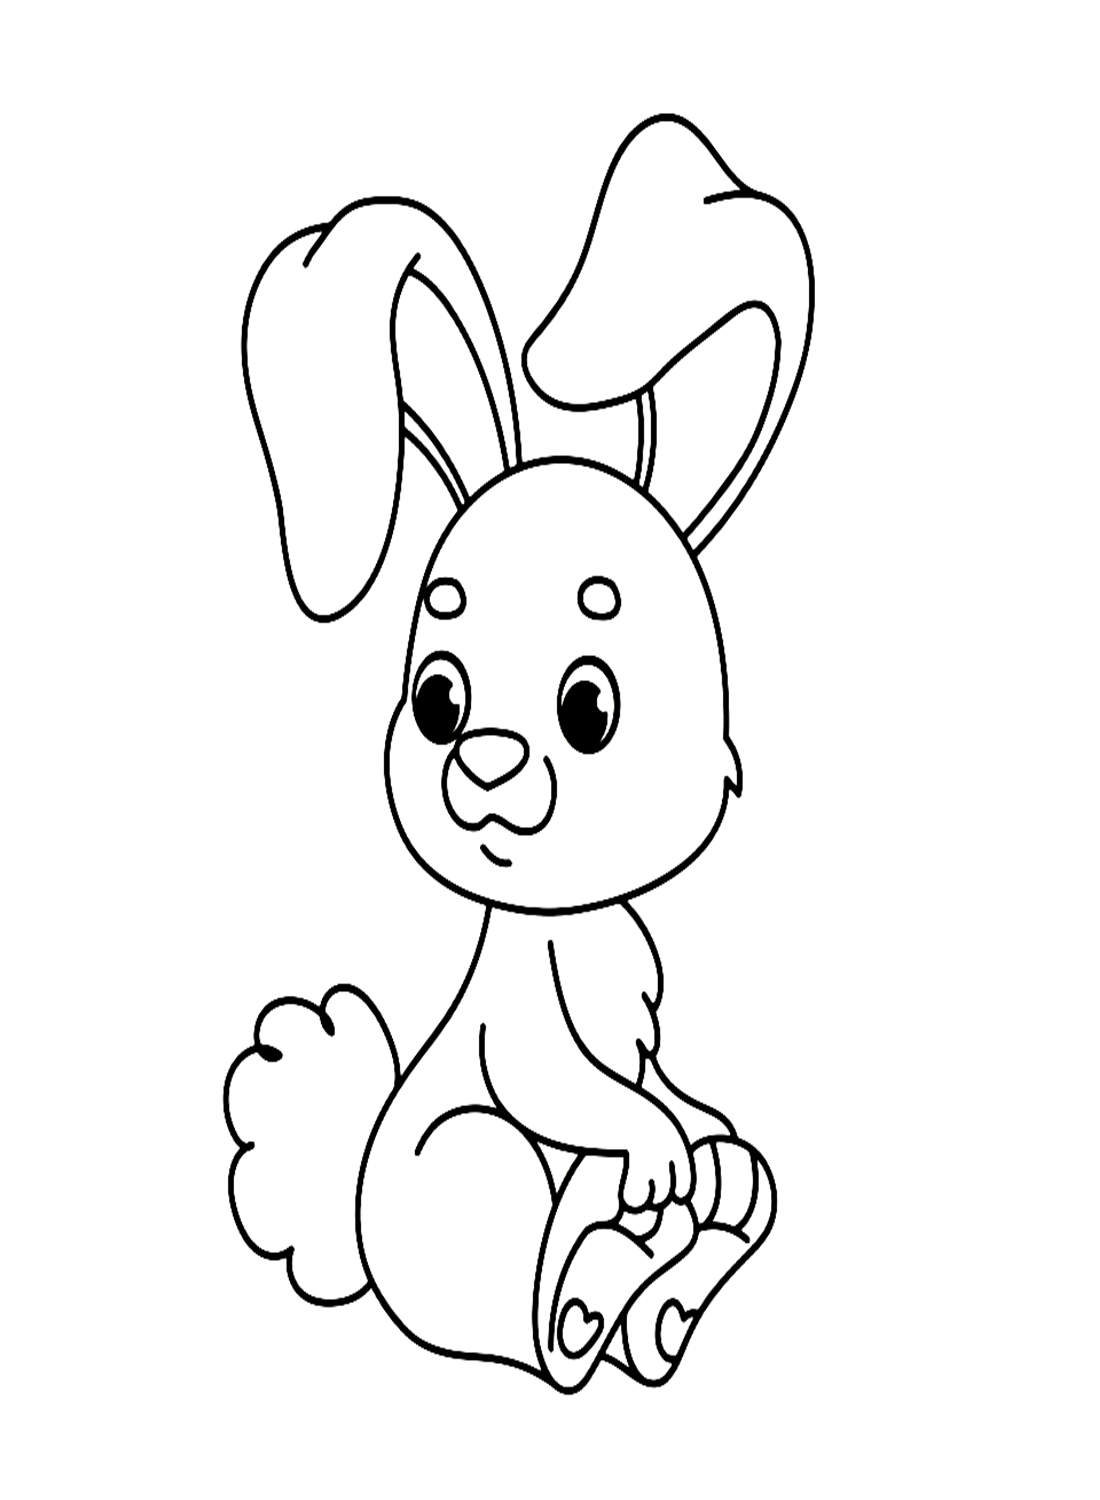 Cute Rabbit Is Sitting Coloring Page - Free Printable Coloring Pages